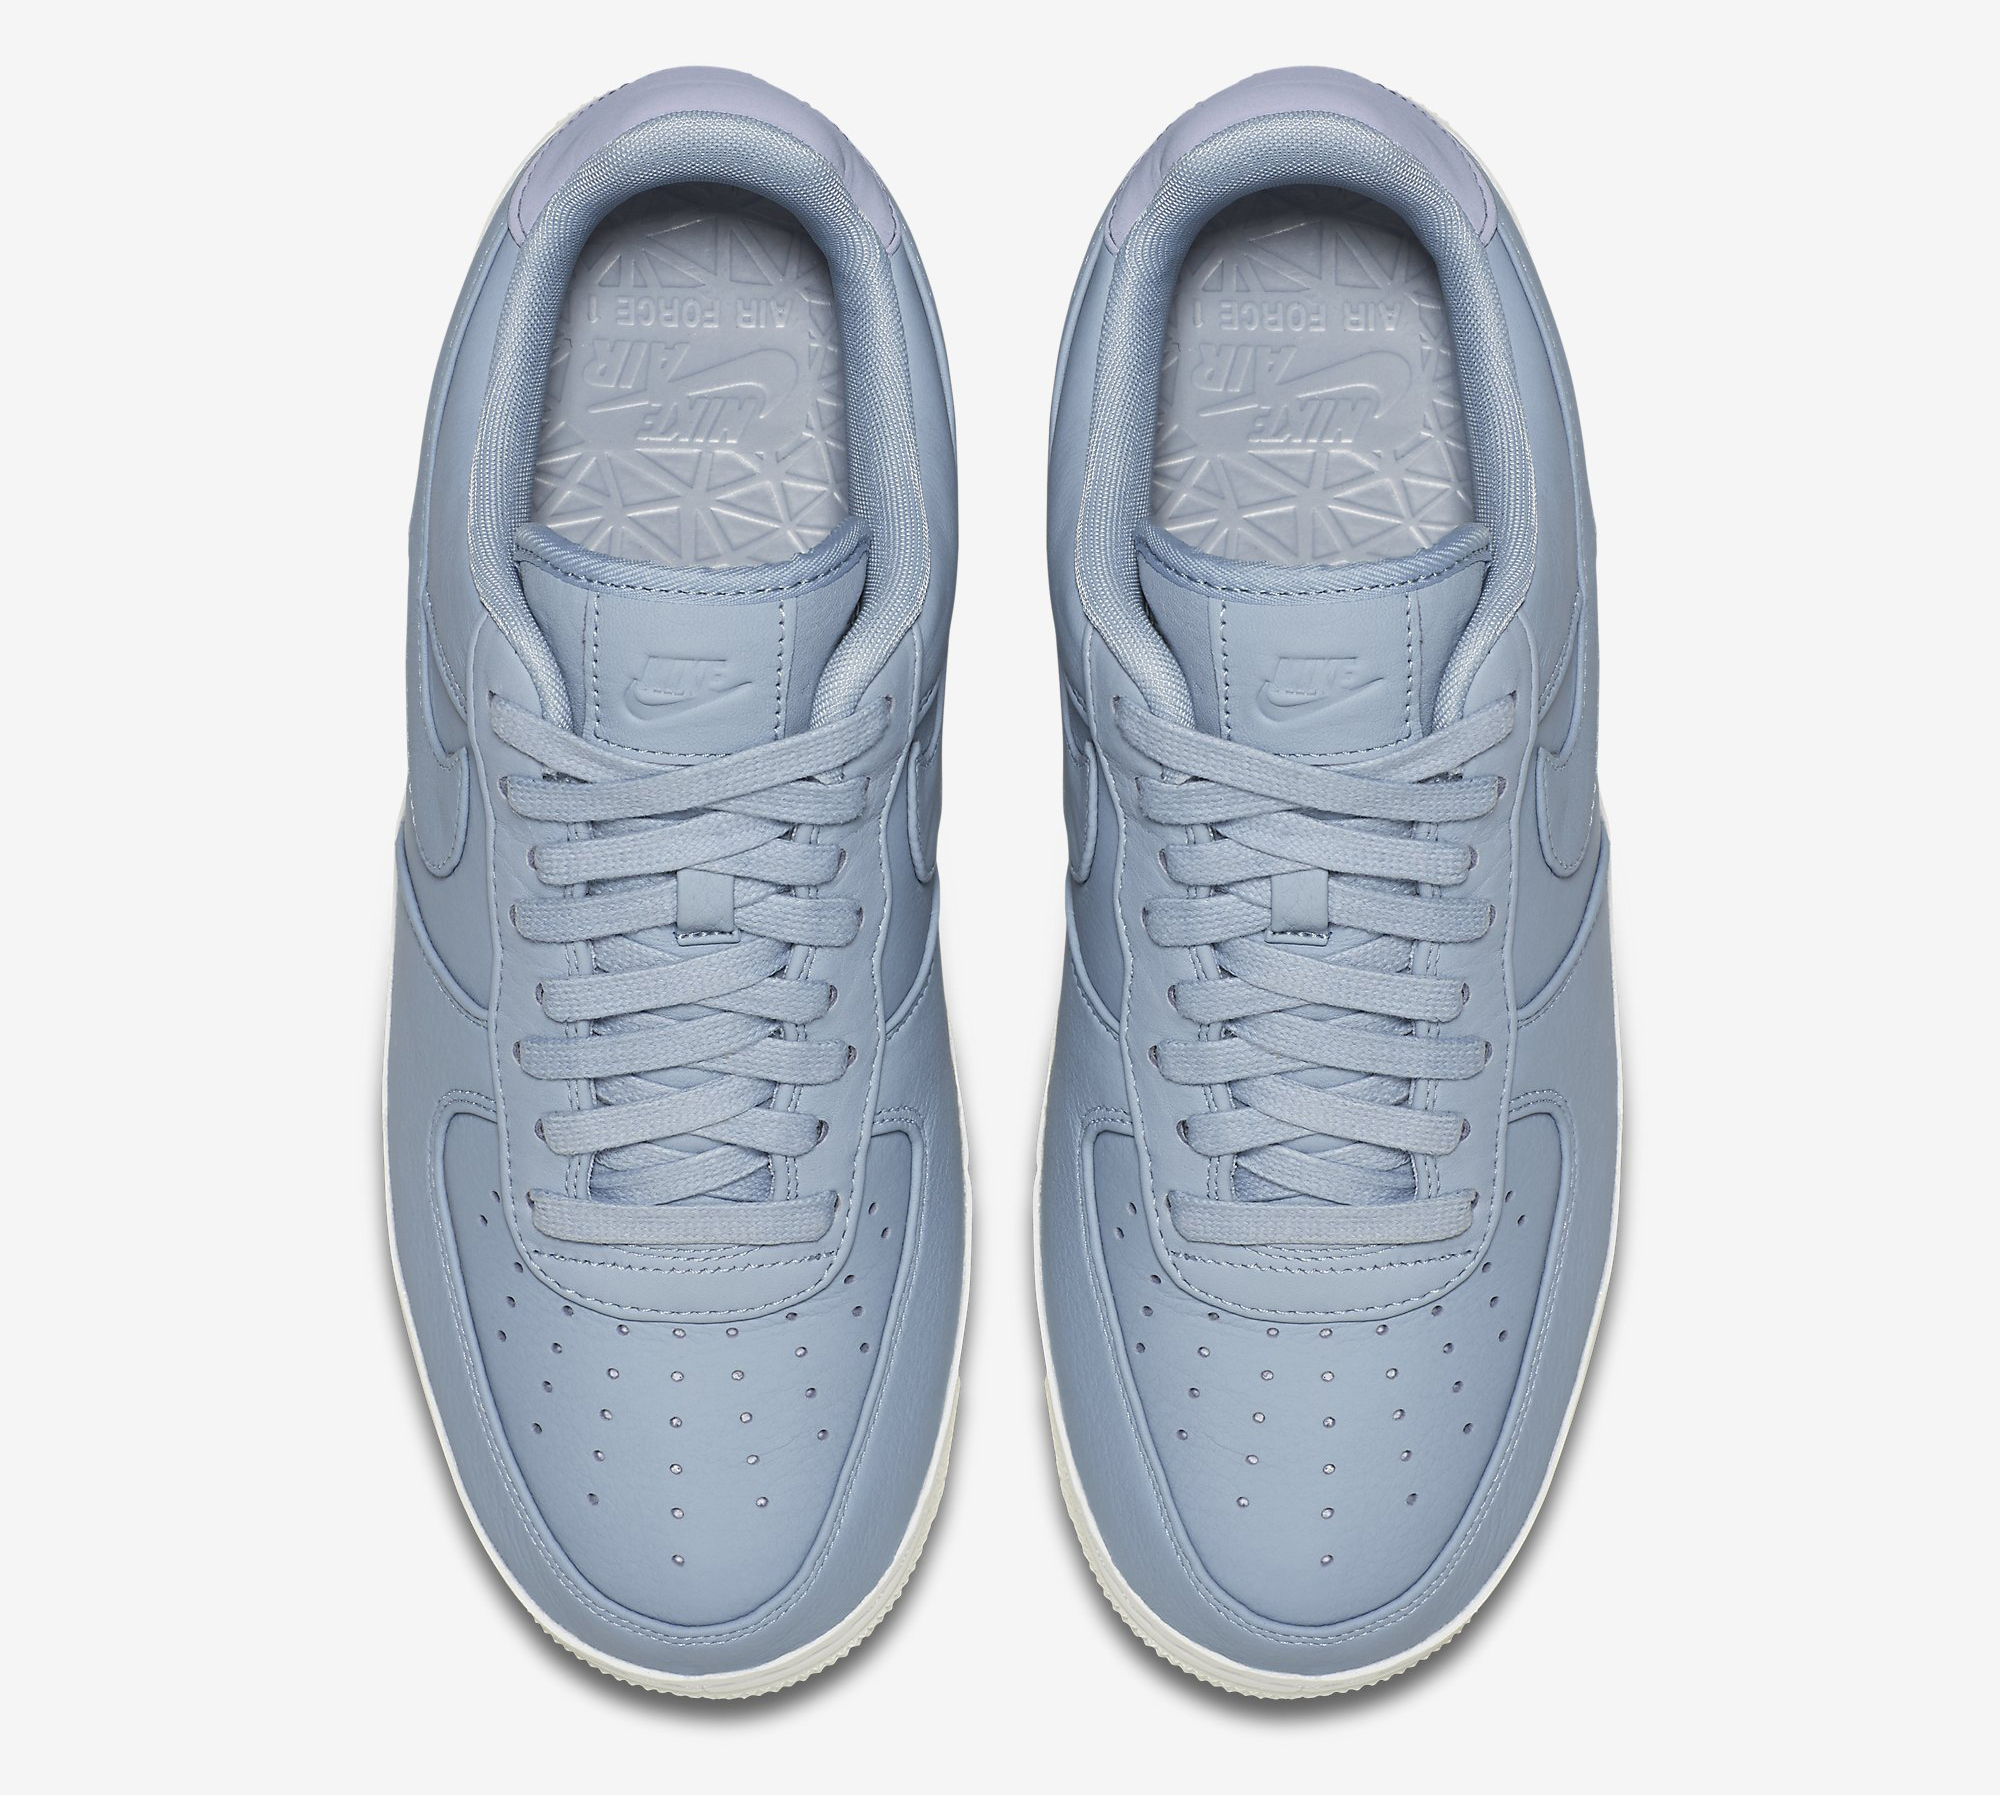 blue air force ones 2016